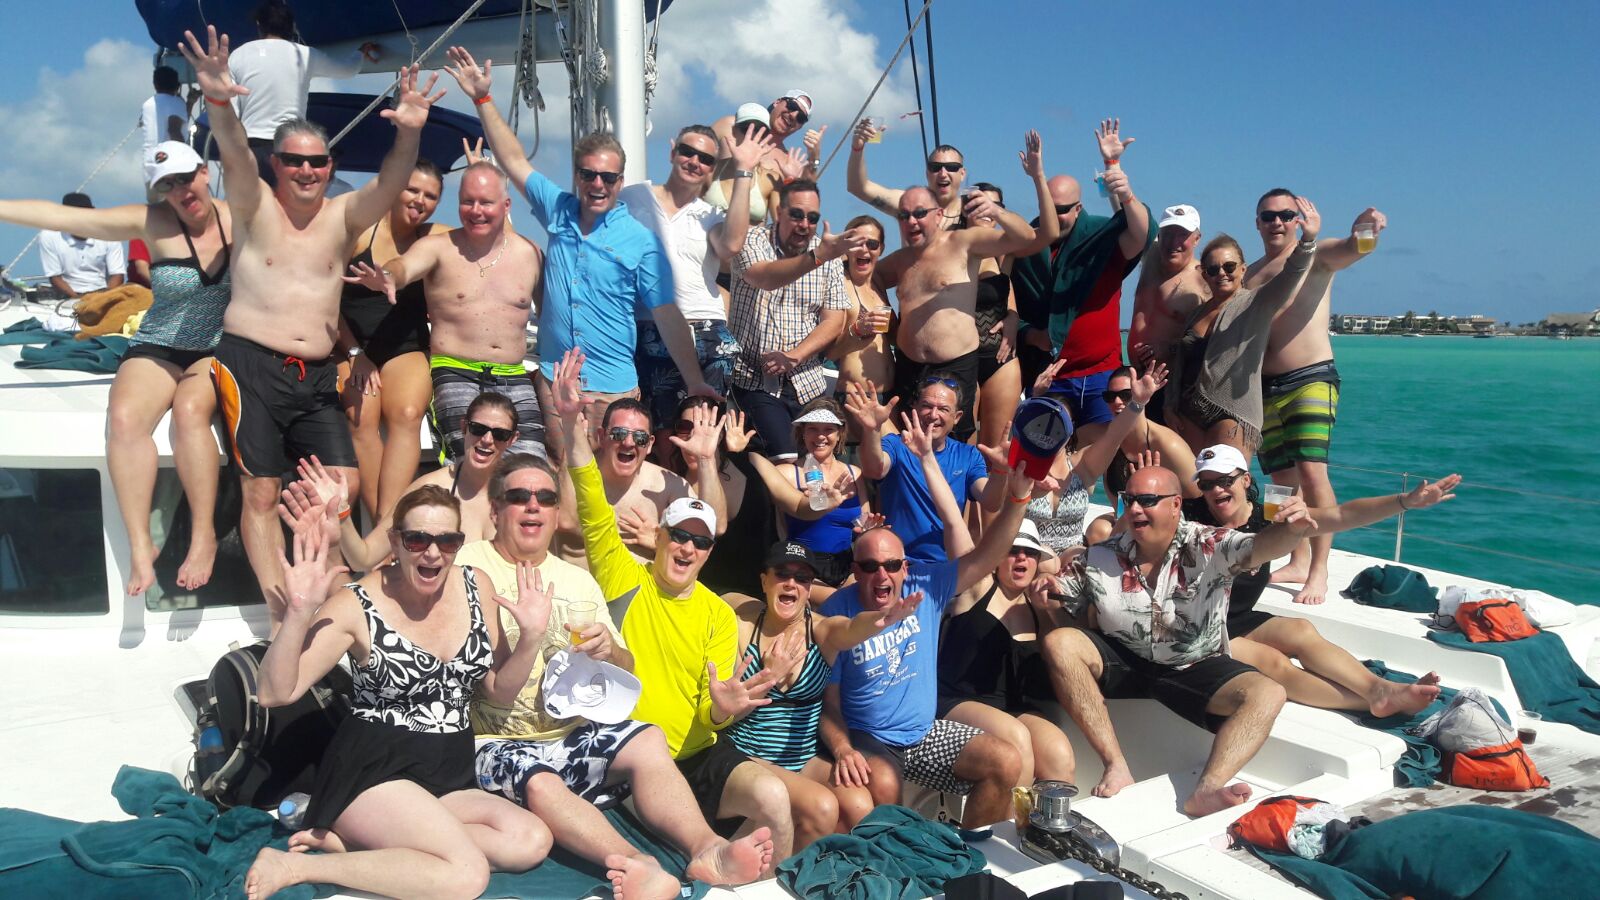 Catamaran tour in Cozumel with capacity for 50 people on board